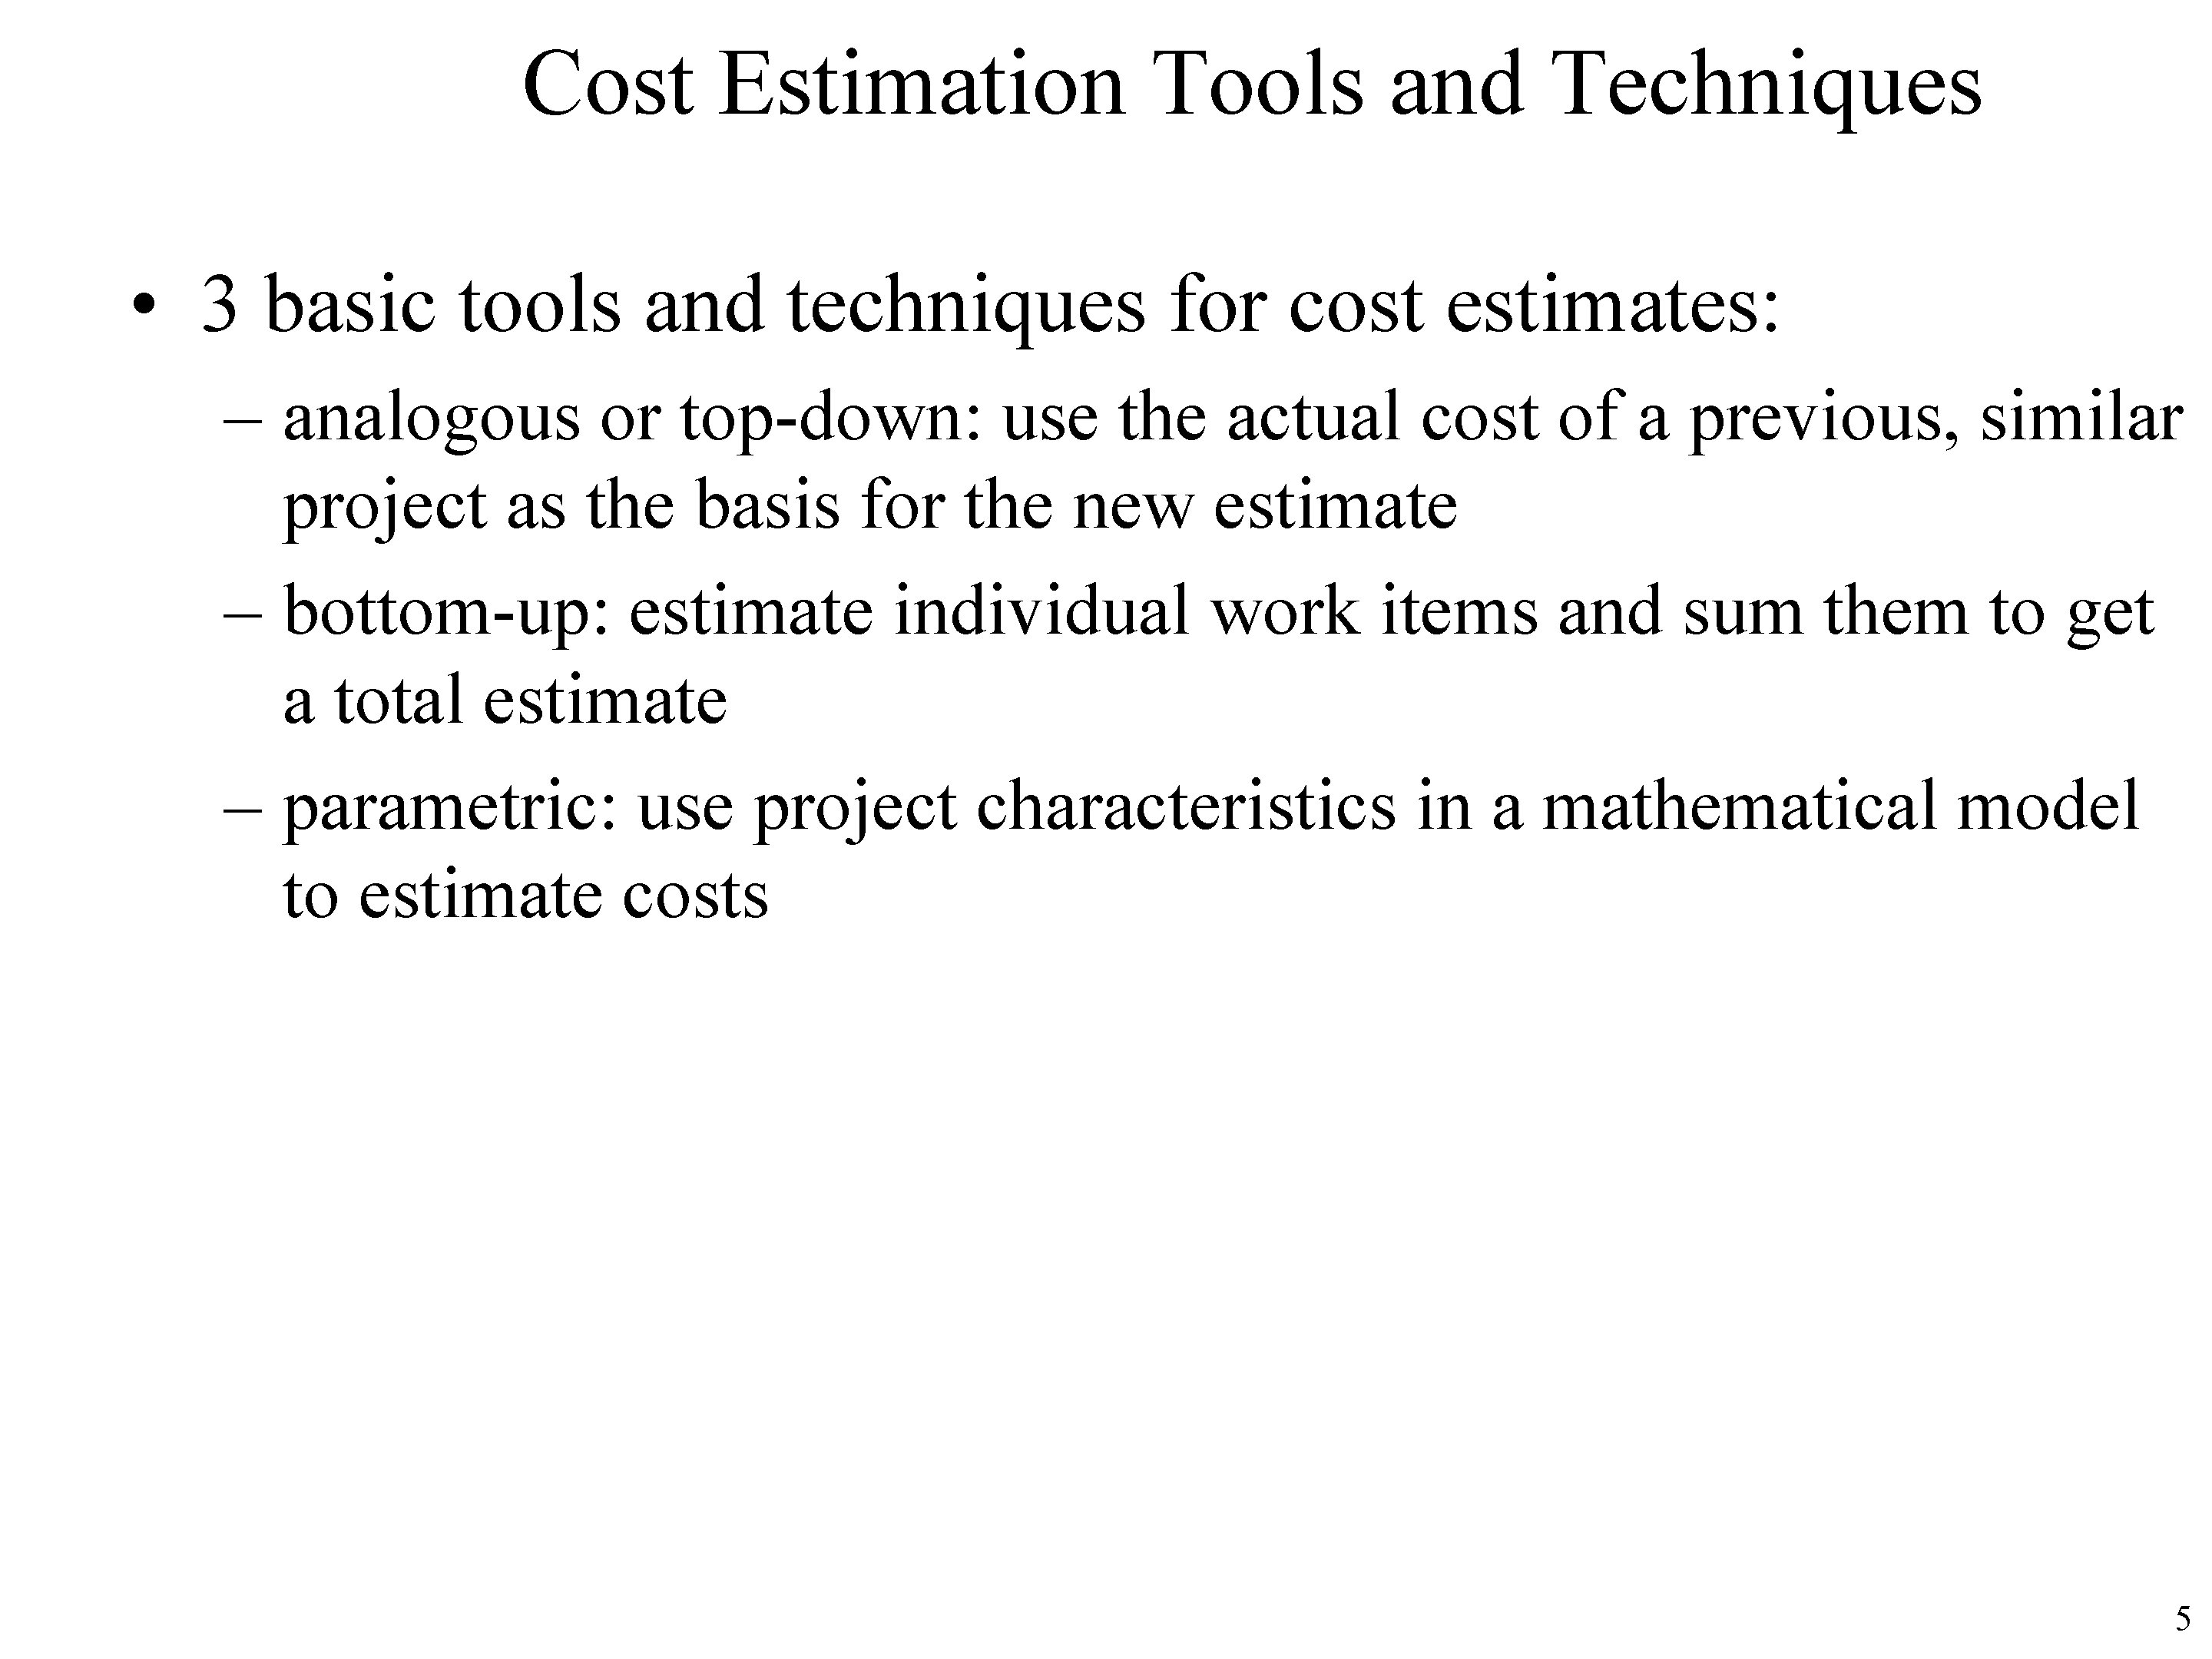 Cost Estimation Tools and Techniques • 3 basic tools and techniques for cost estimates: